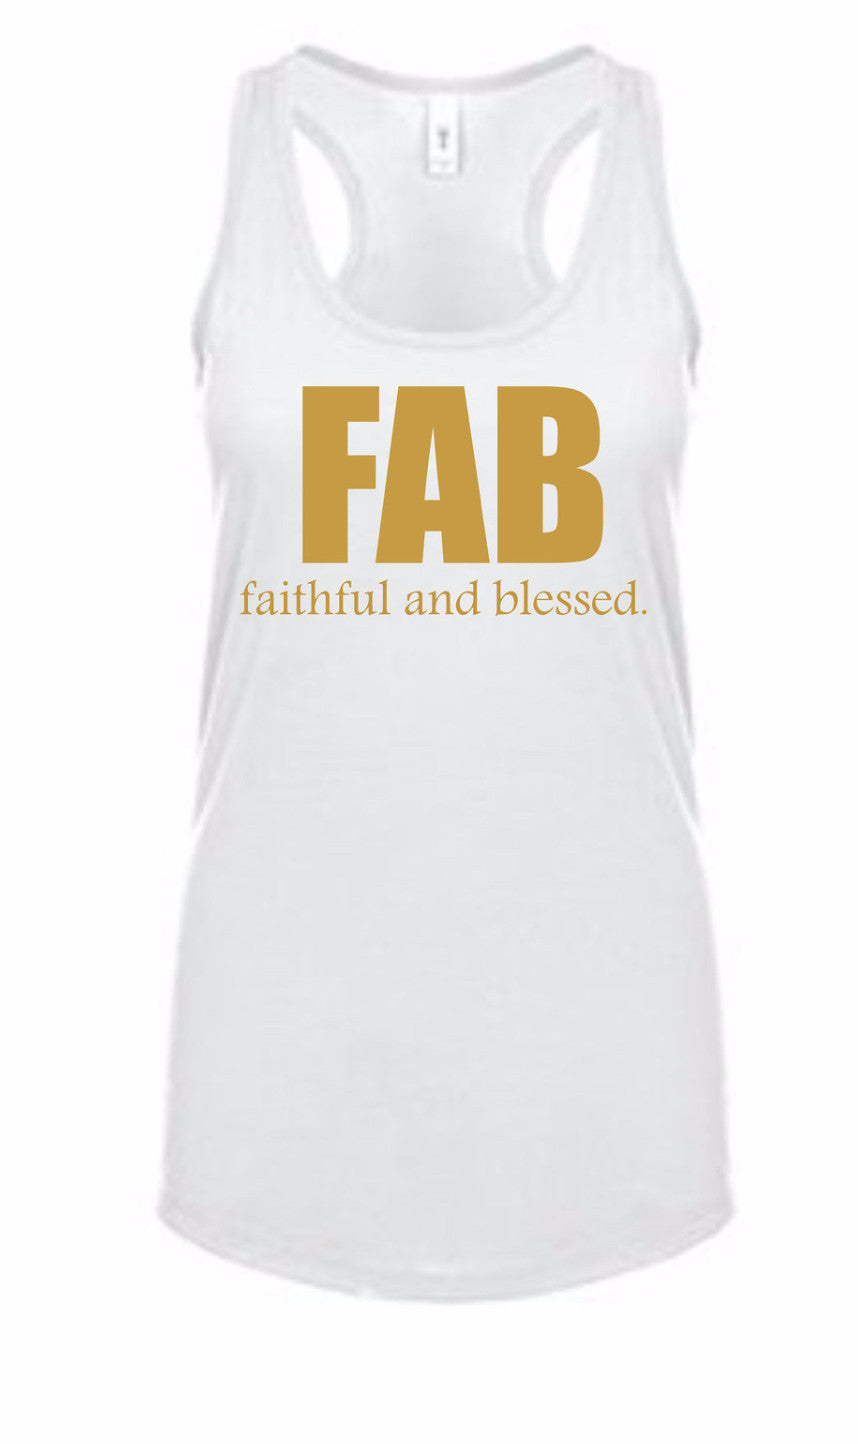 FAB faithful and blessed